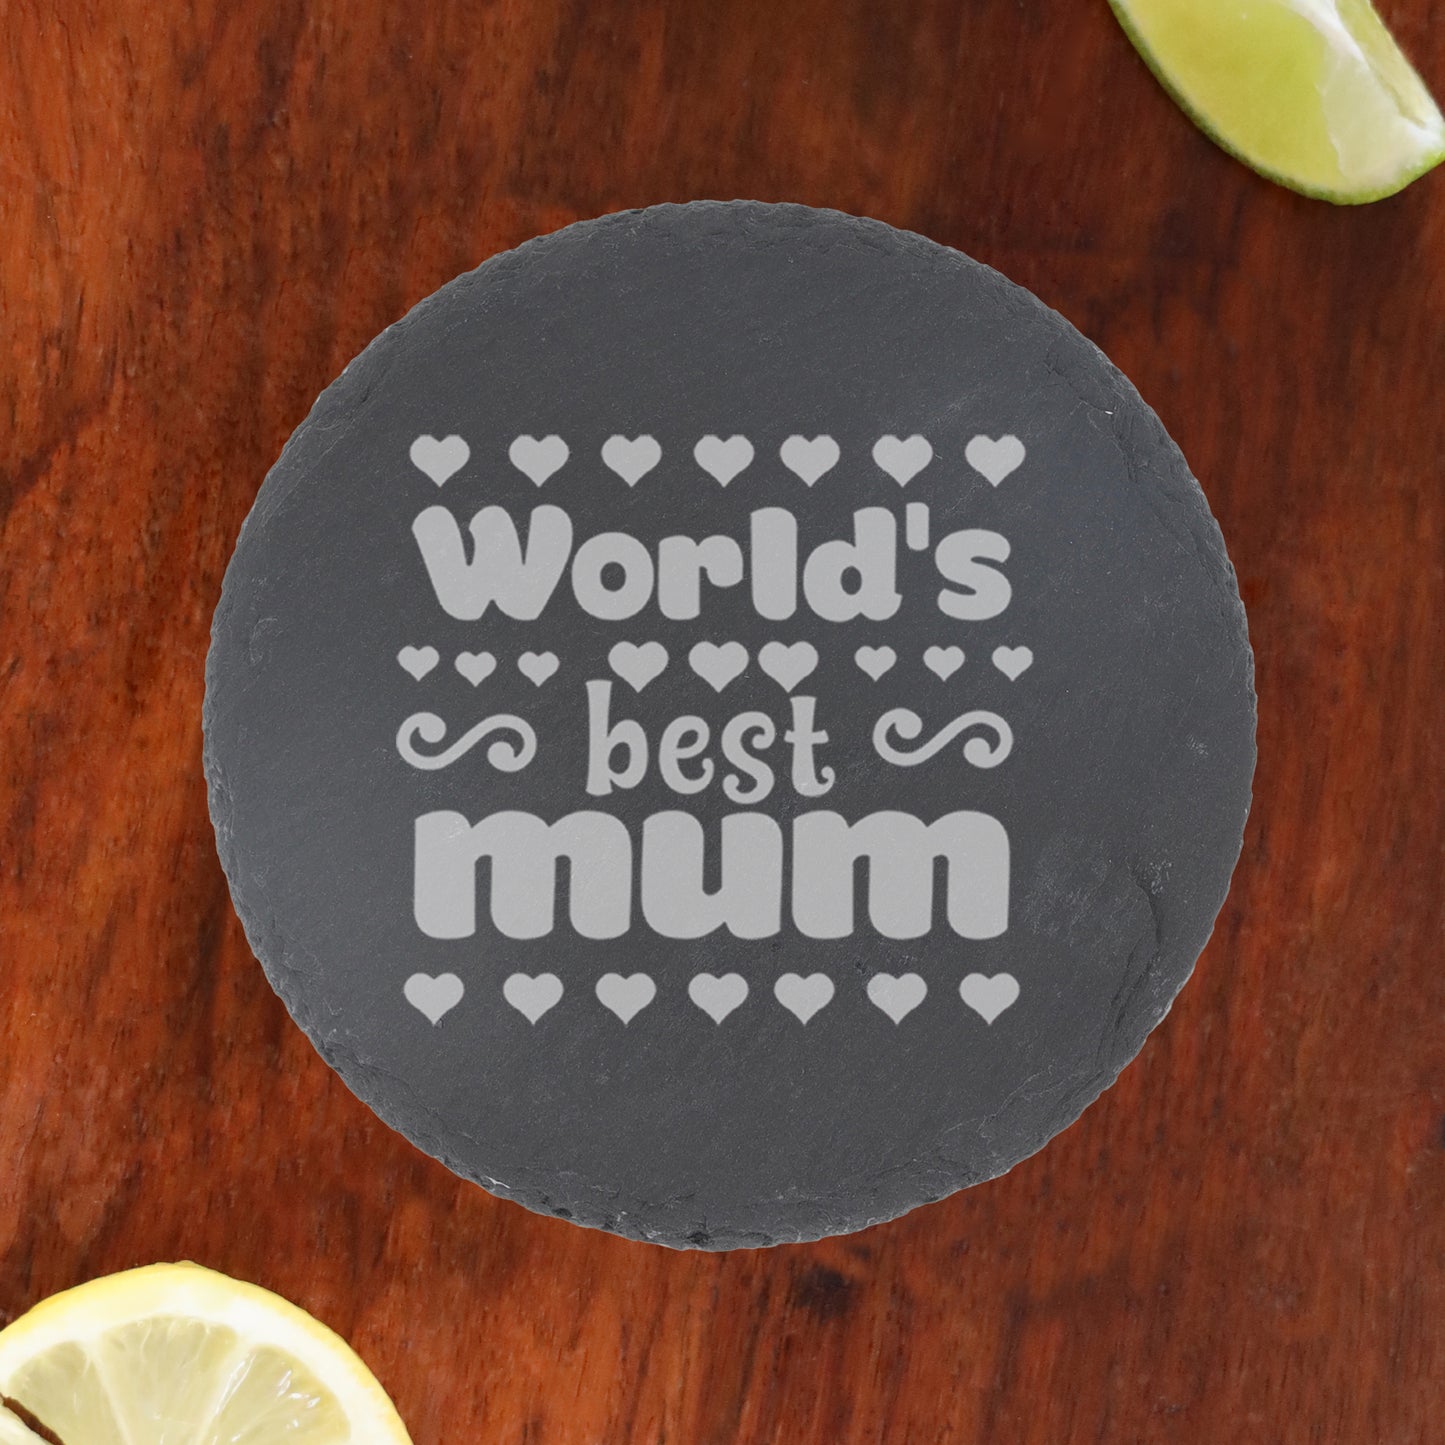 World's Best Mum Engraved Wine Glass and/or Coaster  - Always Looking Good - Round Coaster Only  